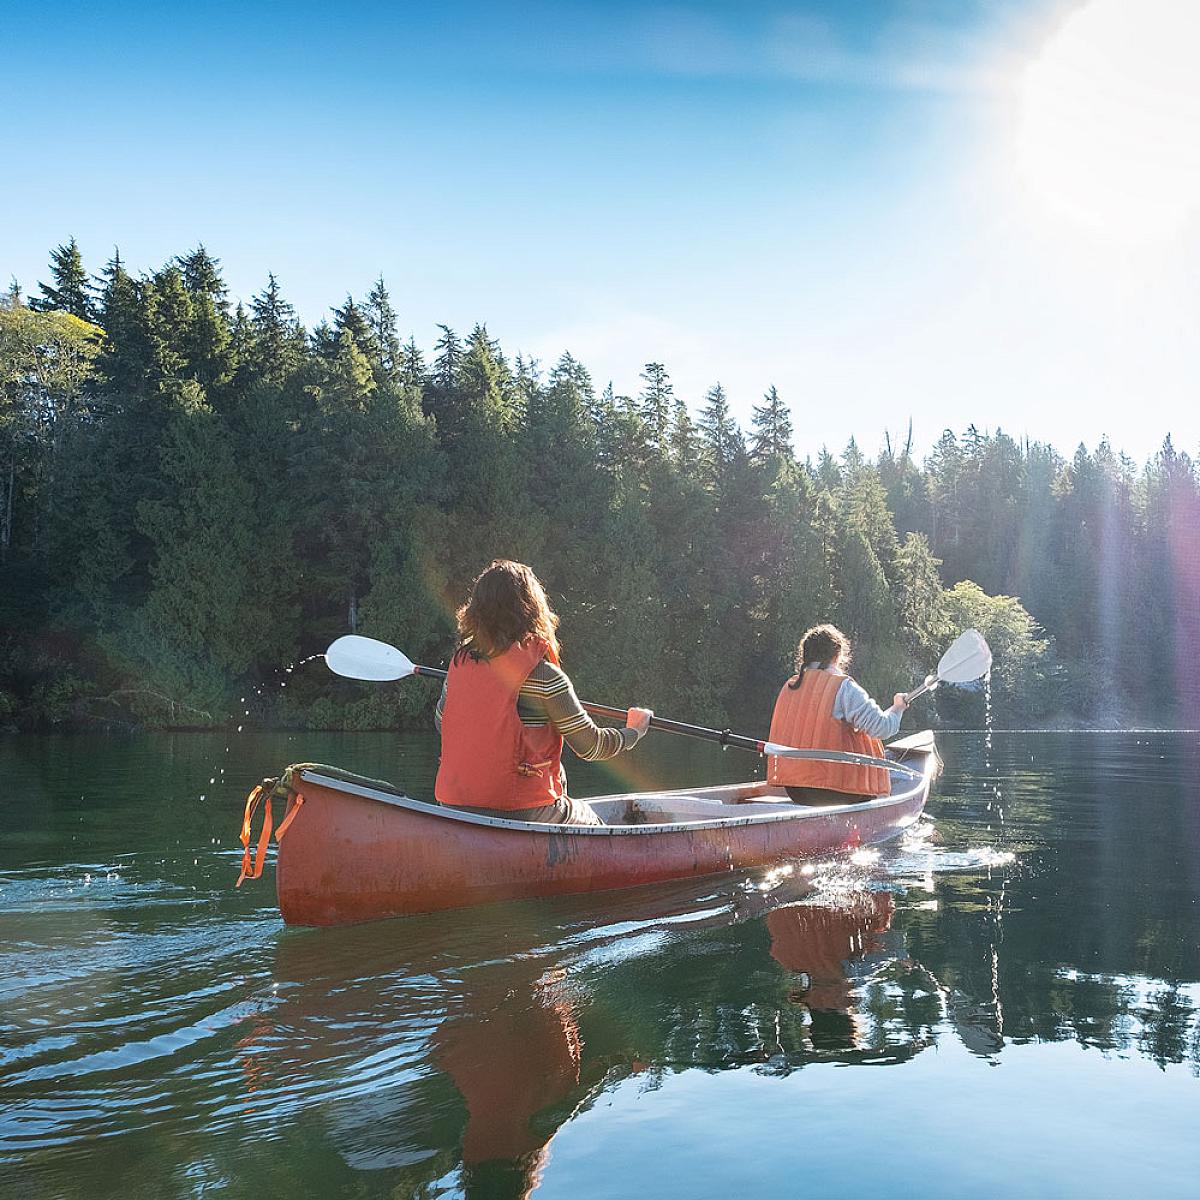 Two women paddling away from the camera in an orange canoe. They are wearing orange life vests and there are pine trees in the background.